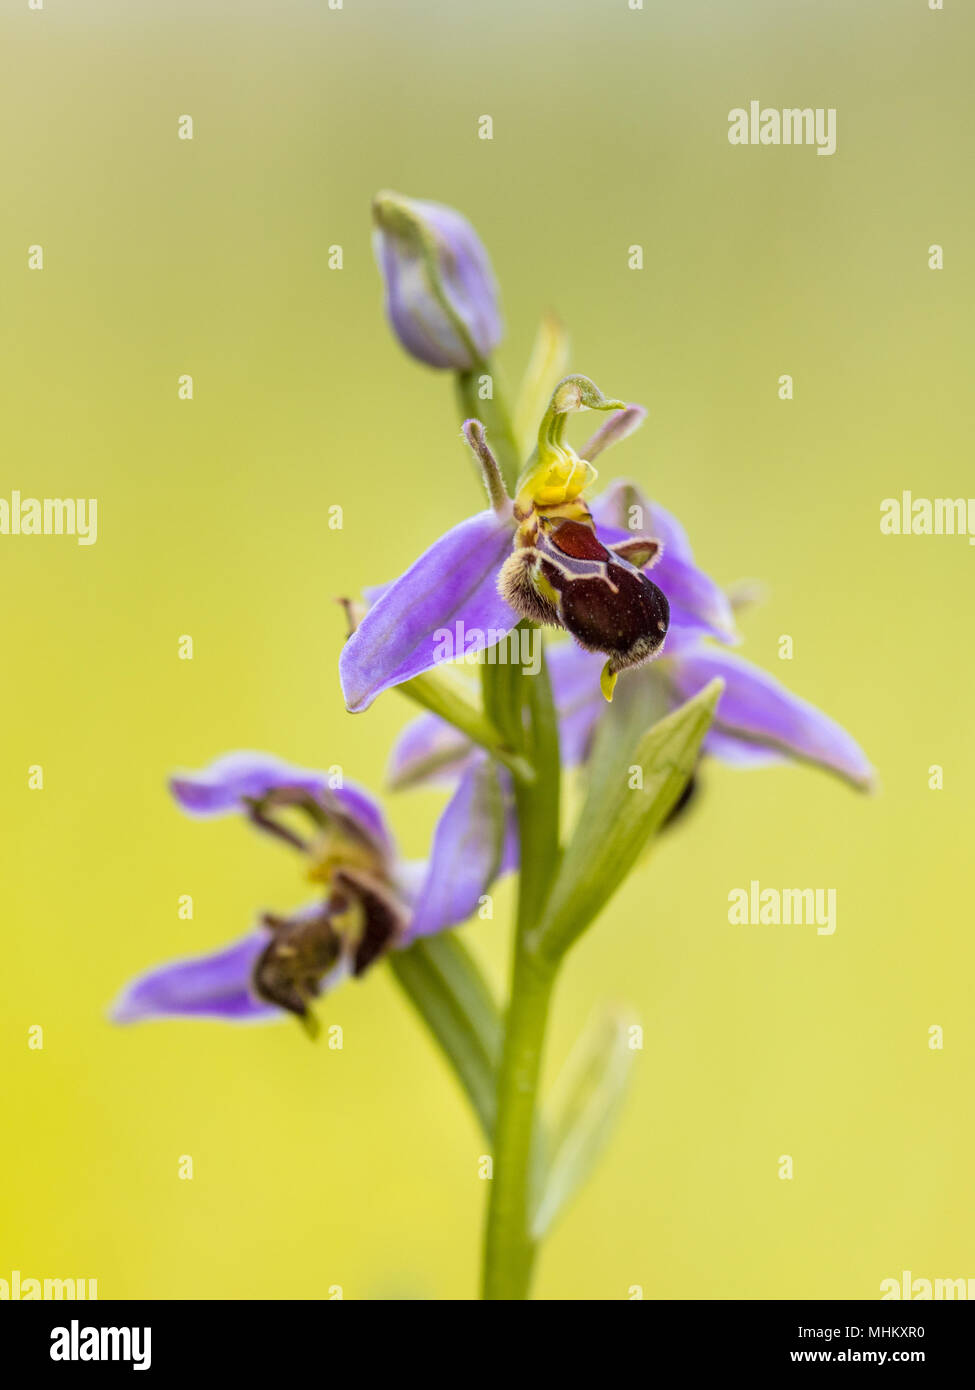 Bee orchid (Ophrys apifera) pink flowers mimicing humblebee insects to polinate the flower. On blurred green background Stock Photo